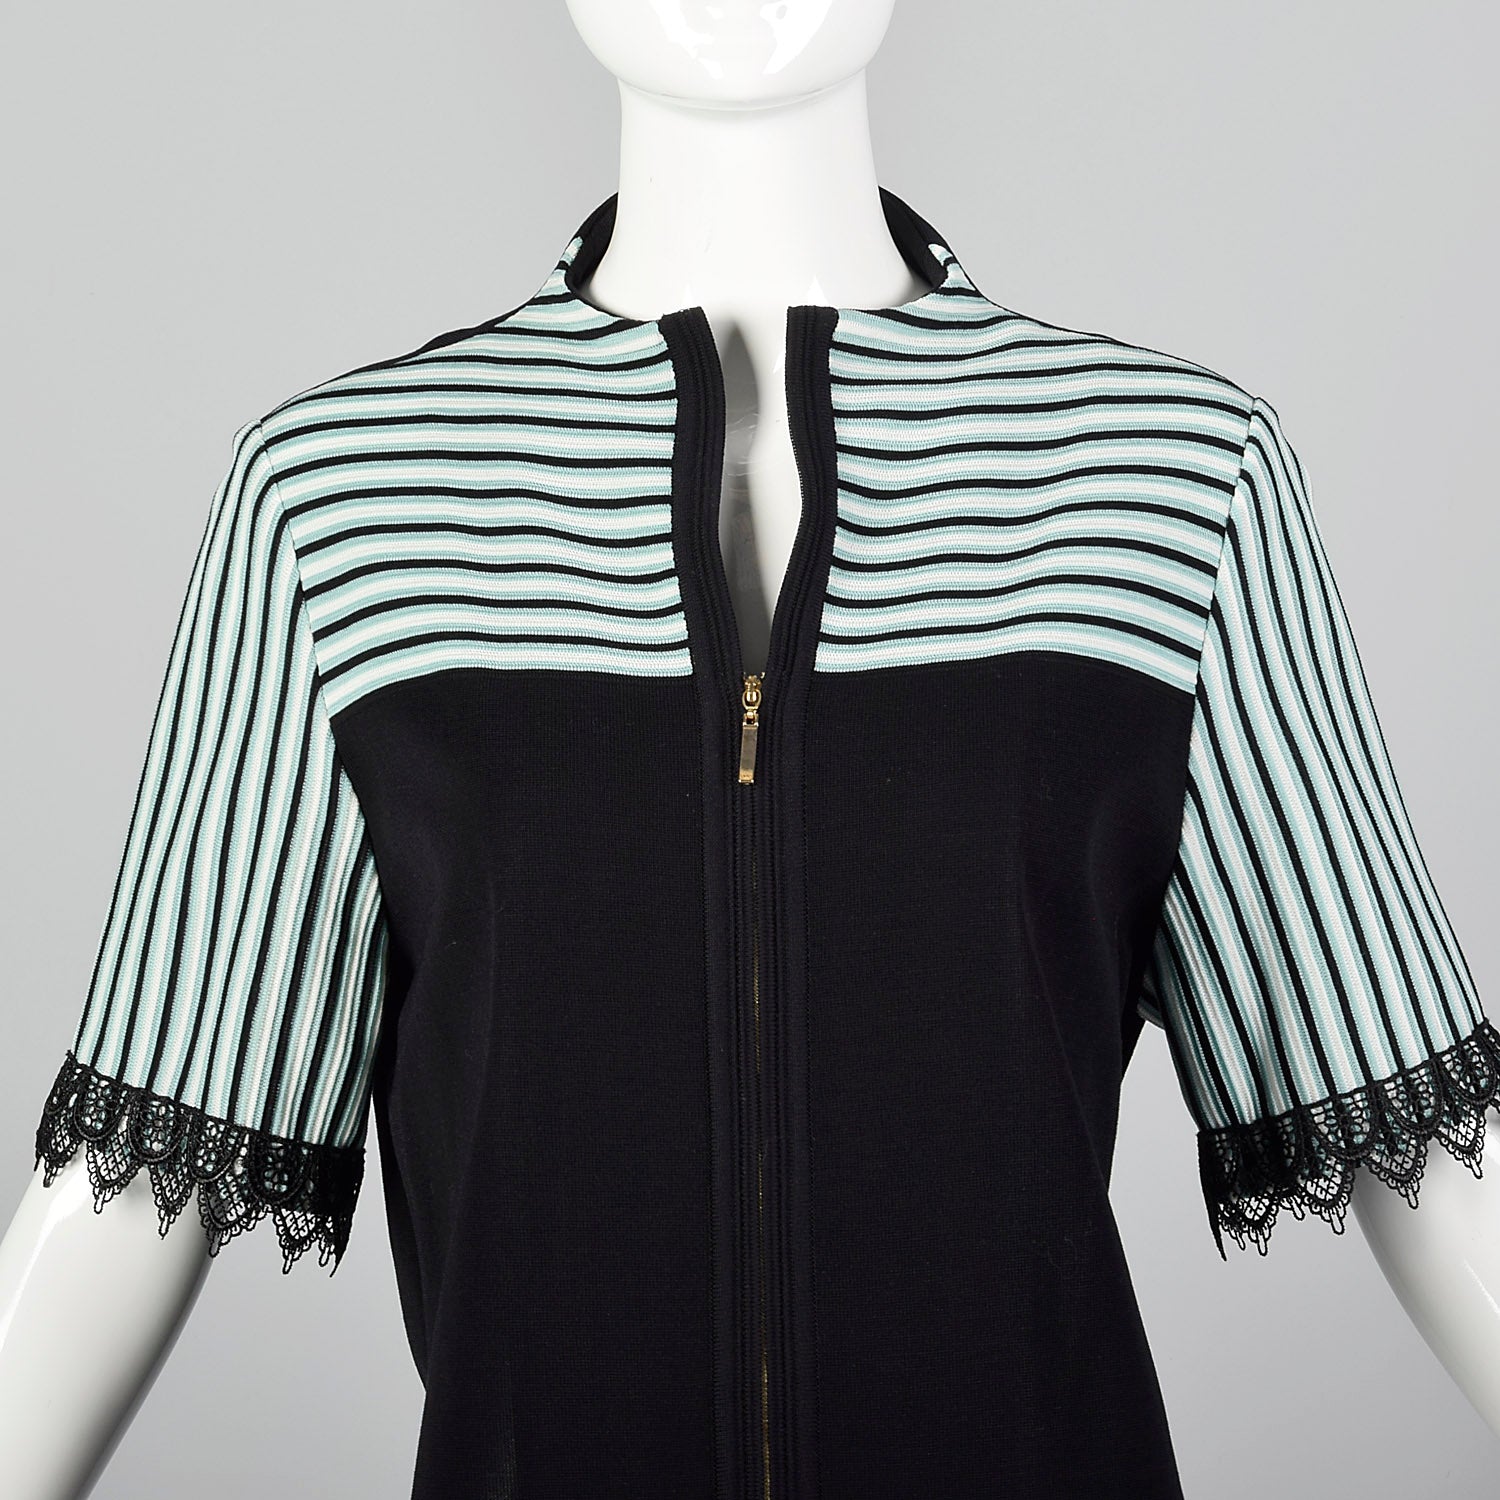 2000s Misook Black and Blue Striped Knit Shirt